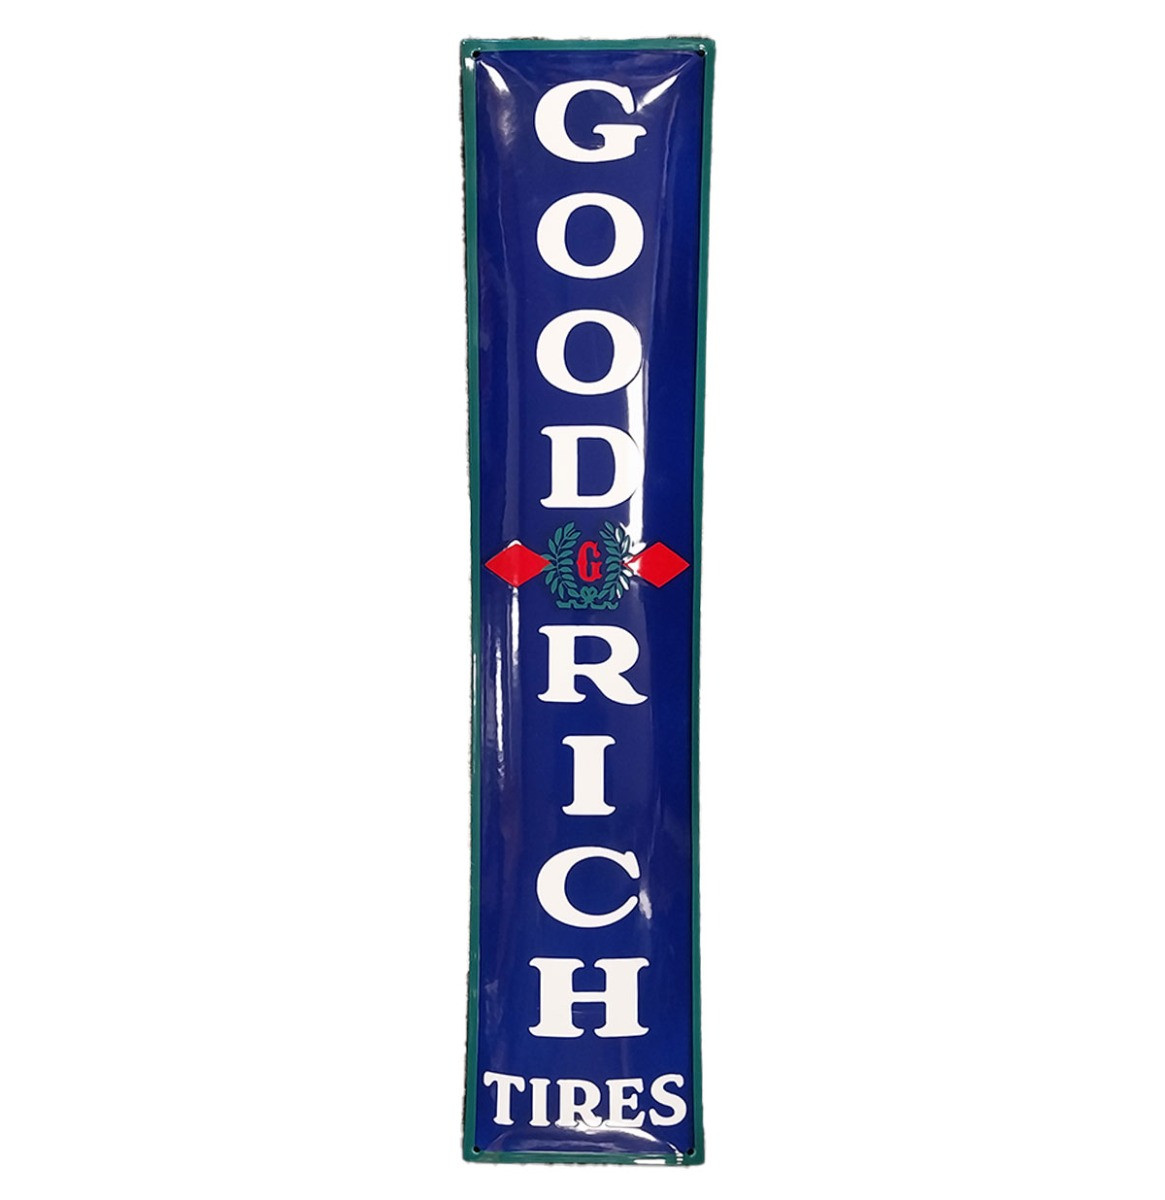 Goodrich Tires Emaille Bord - 90 x 20cm